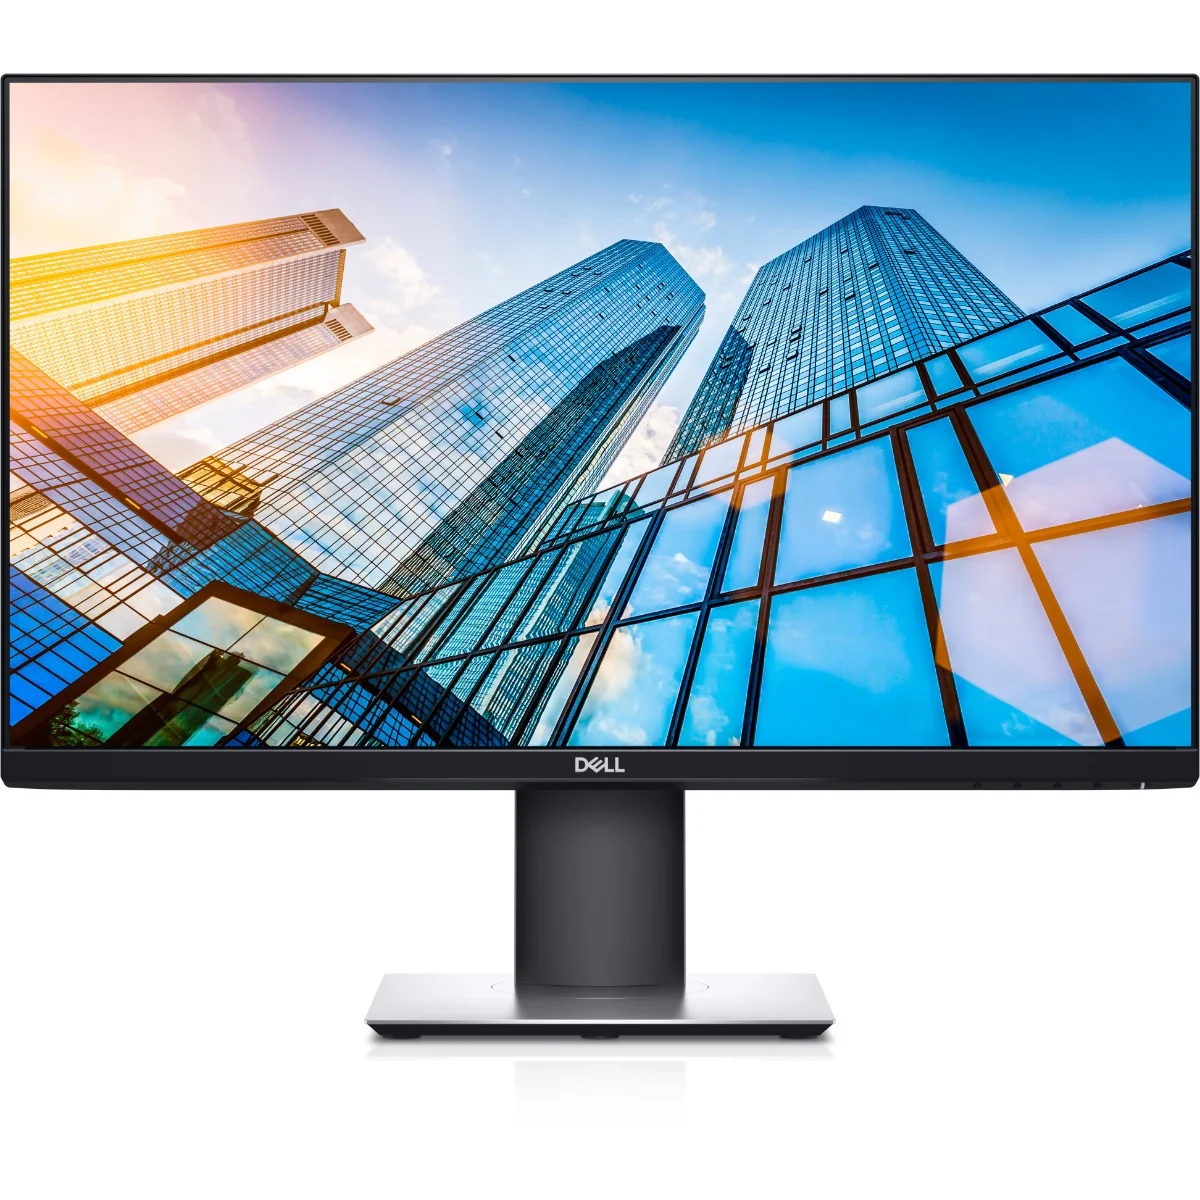 Dell P2419H 24" FHD (1920x1080) IPS LED Monitor